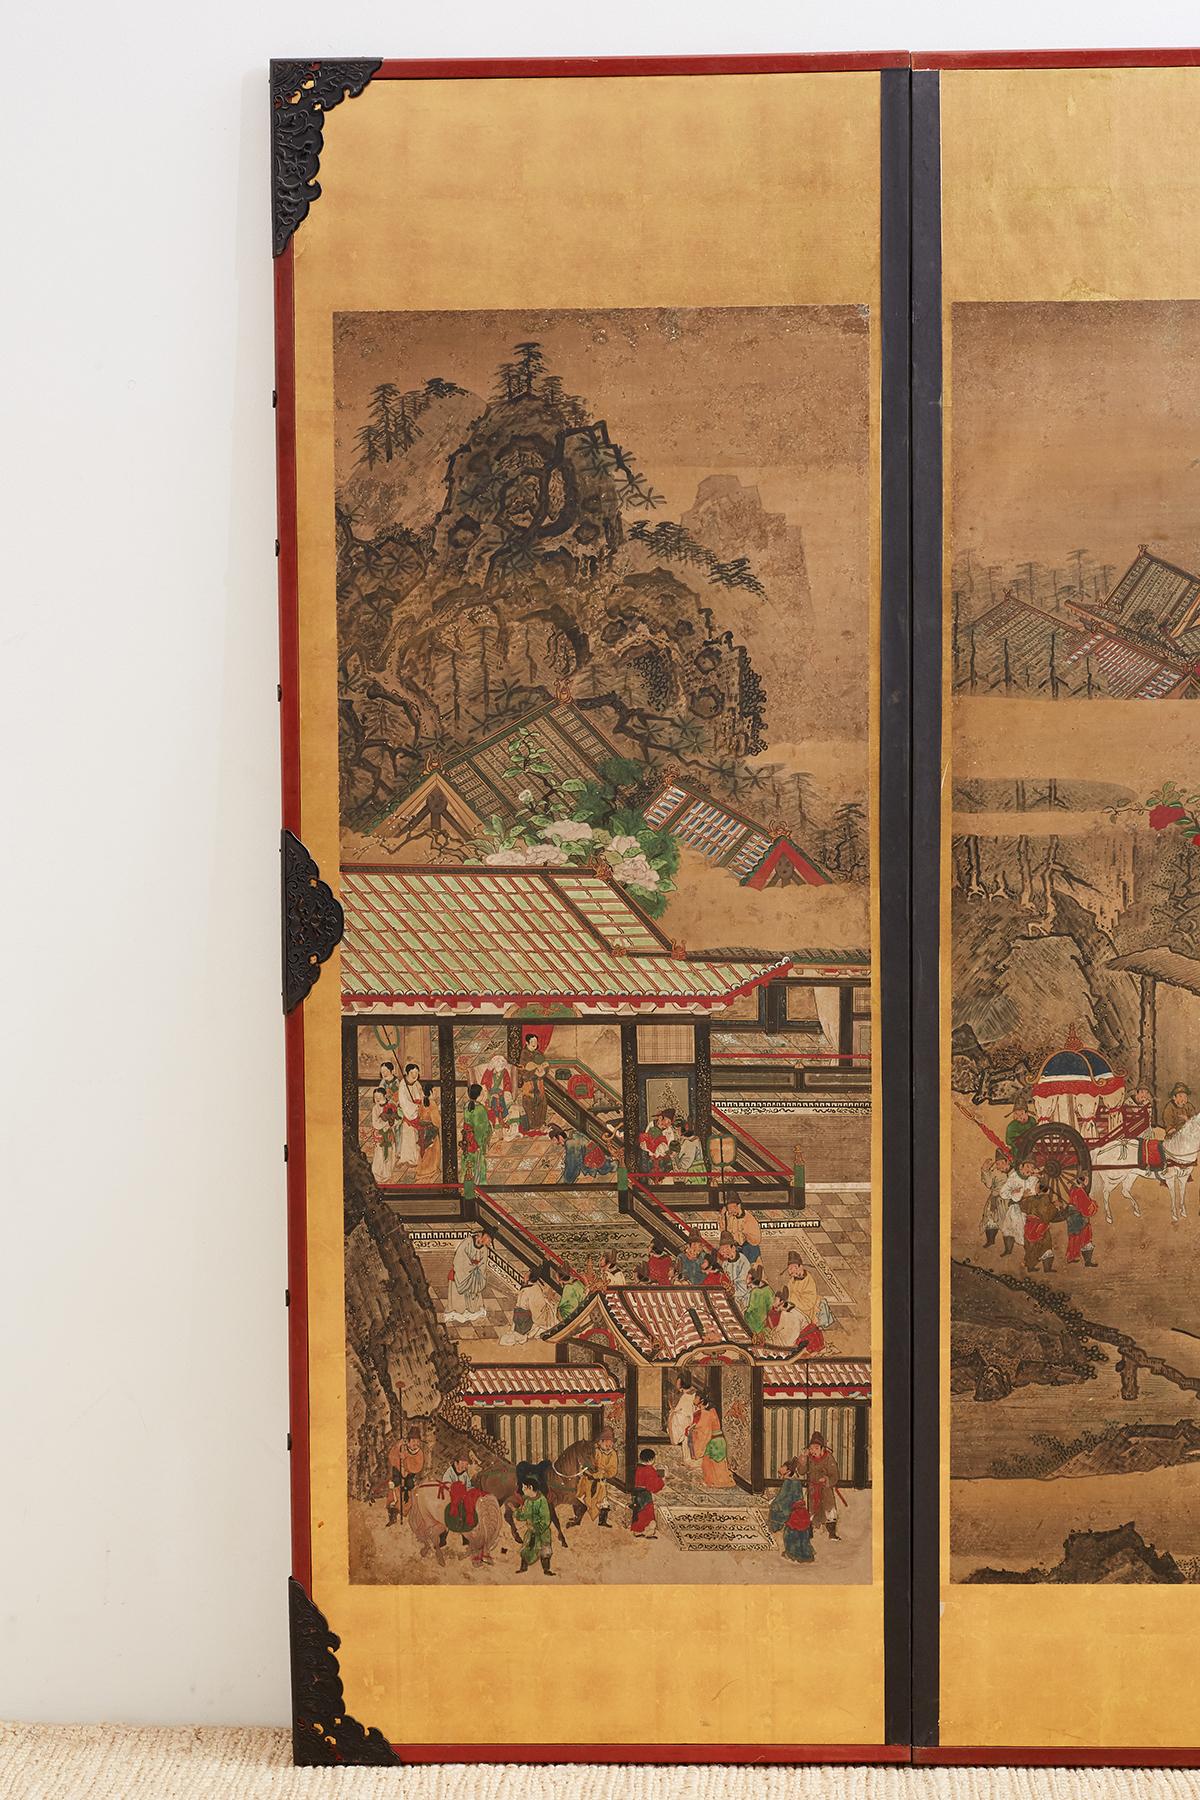 Colorful pair of Japanese scrolls mounted as panels each having a border of gold leaf squares. Set in wooden frames that are painted with ebonized metal decoration. Appear to be parts of larger screens or scrolls painted with Kano School style and